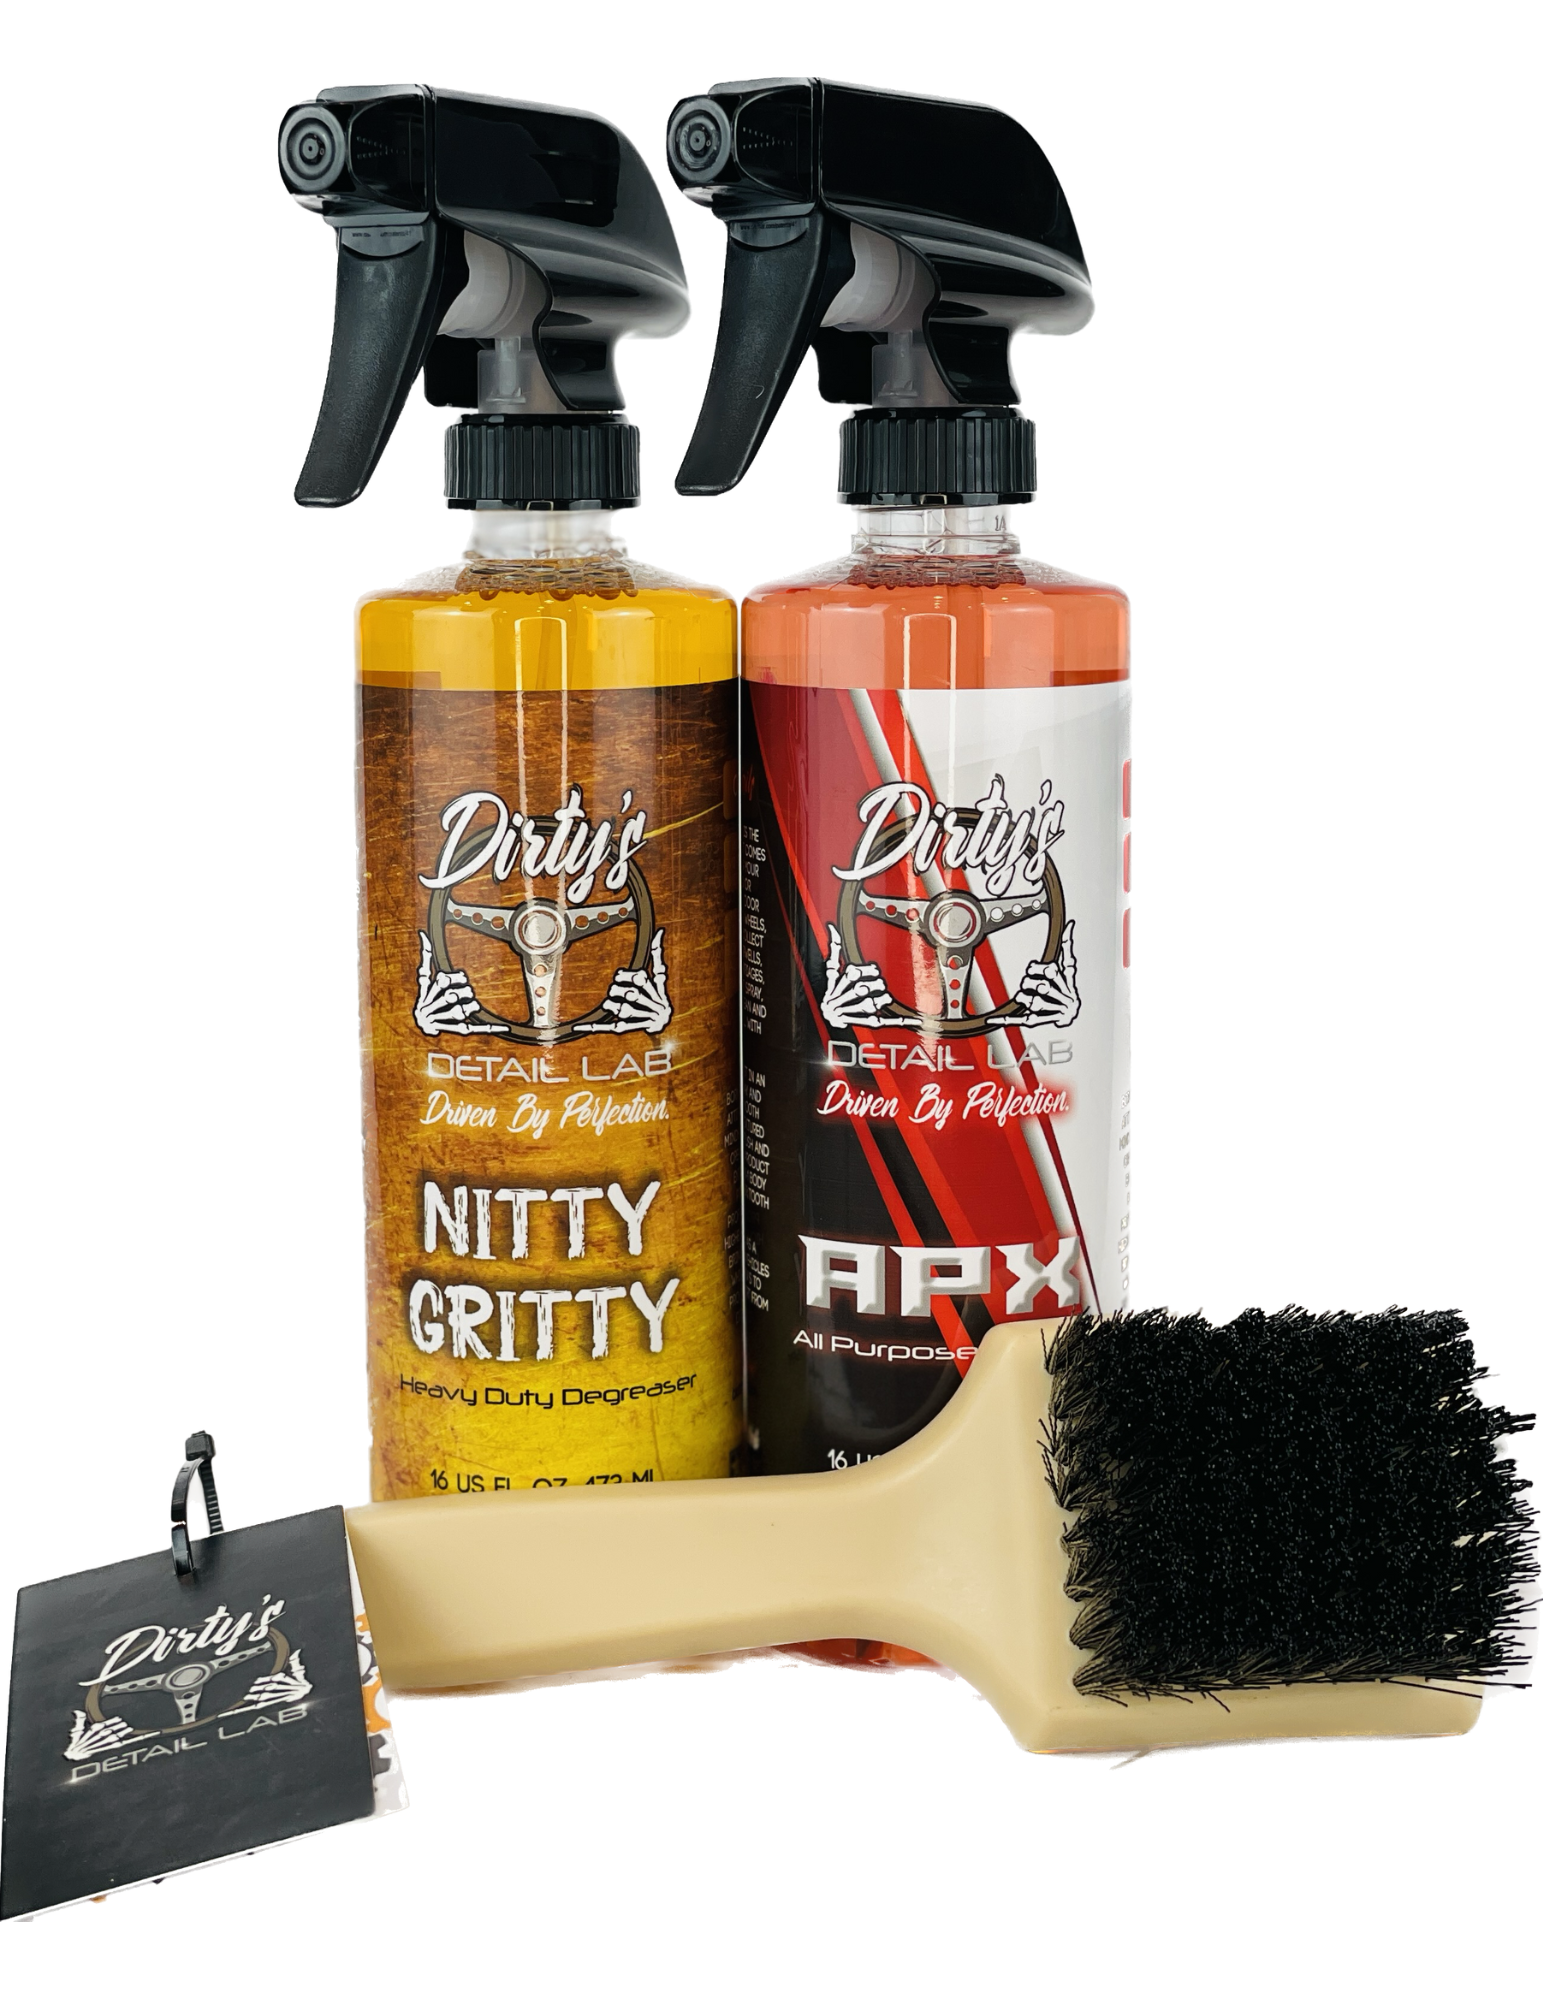 Automotive Cleaner And Degreaser | Elbow Grease Bundle | Dirty's Detail Lab